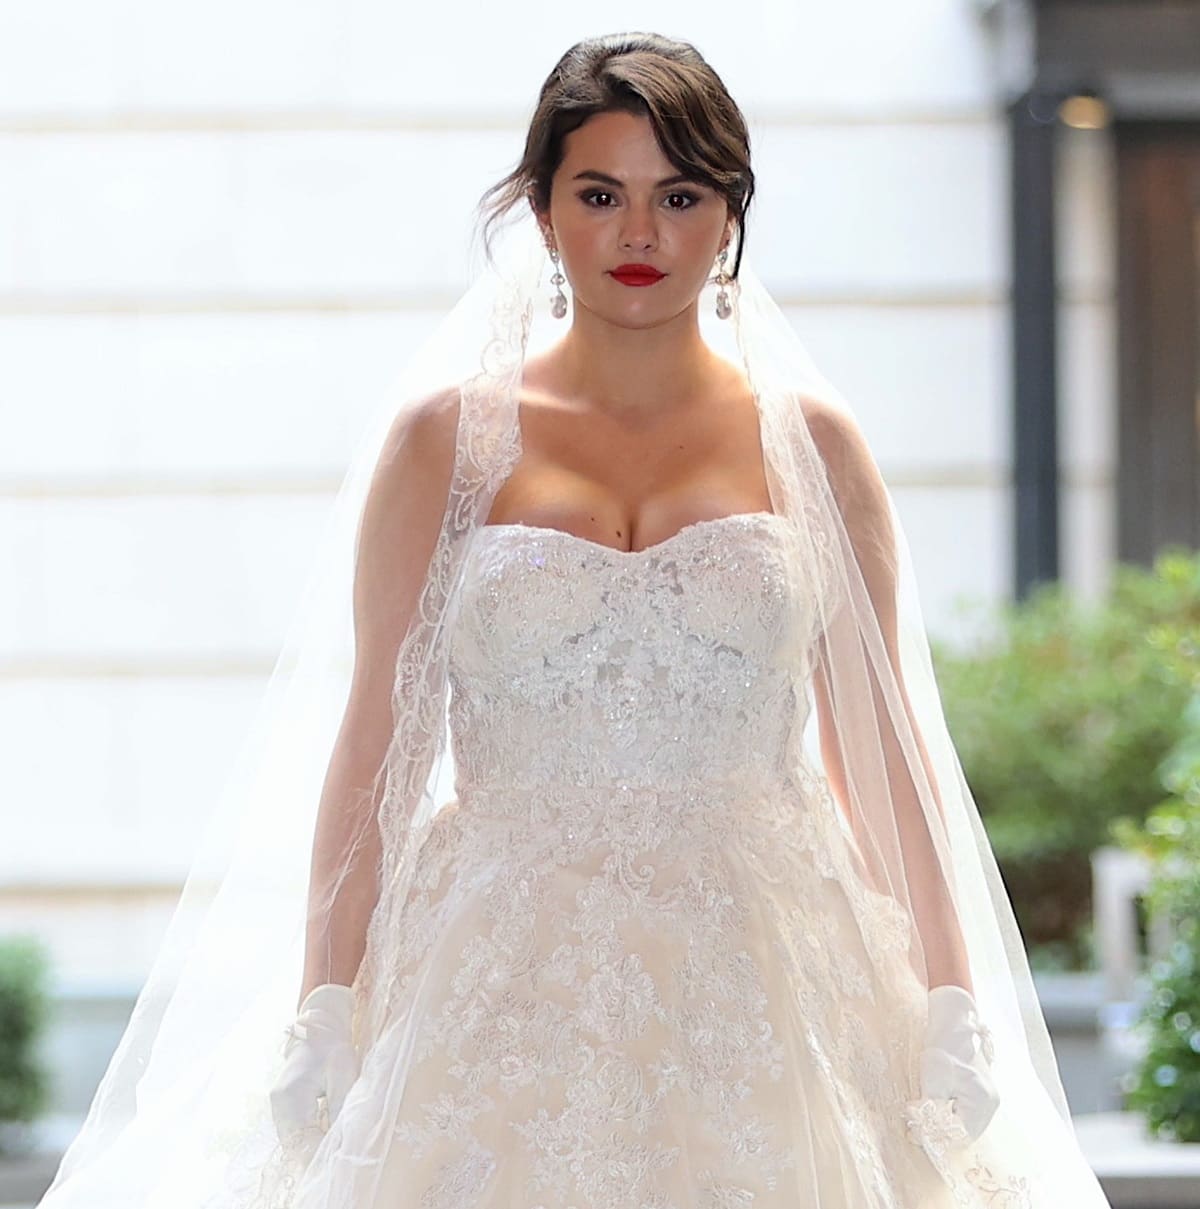 Selena Gomez sporting a strapless, lace-trimmed ballgown with a full skirt, long veil, and dangling baroque pearl earrings